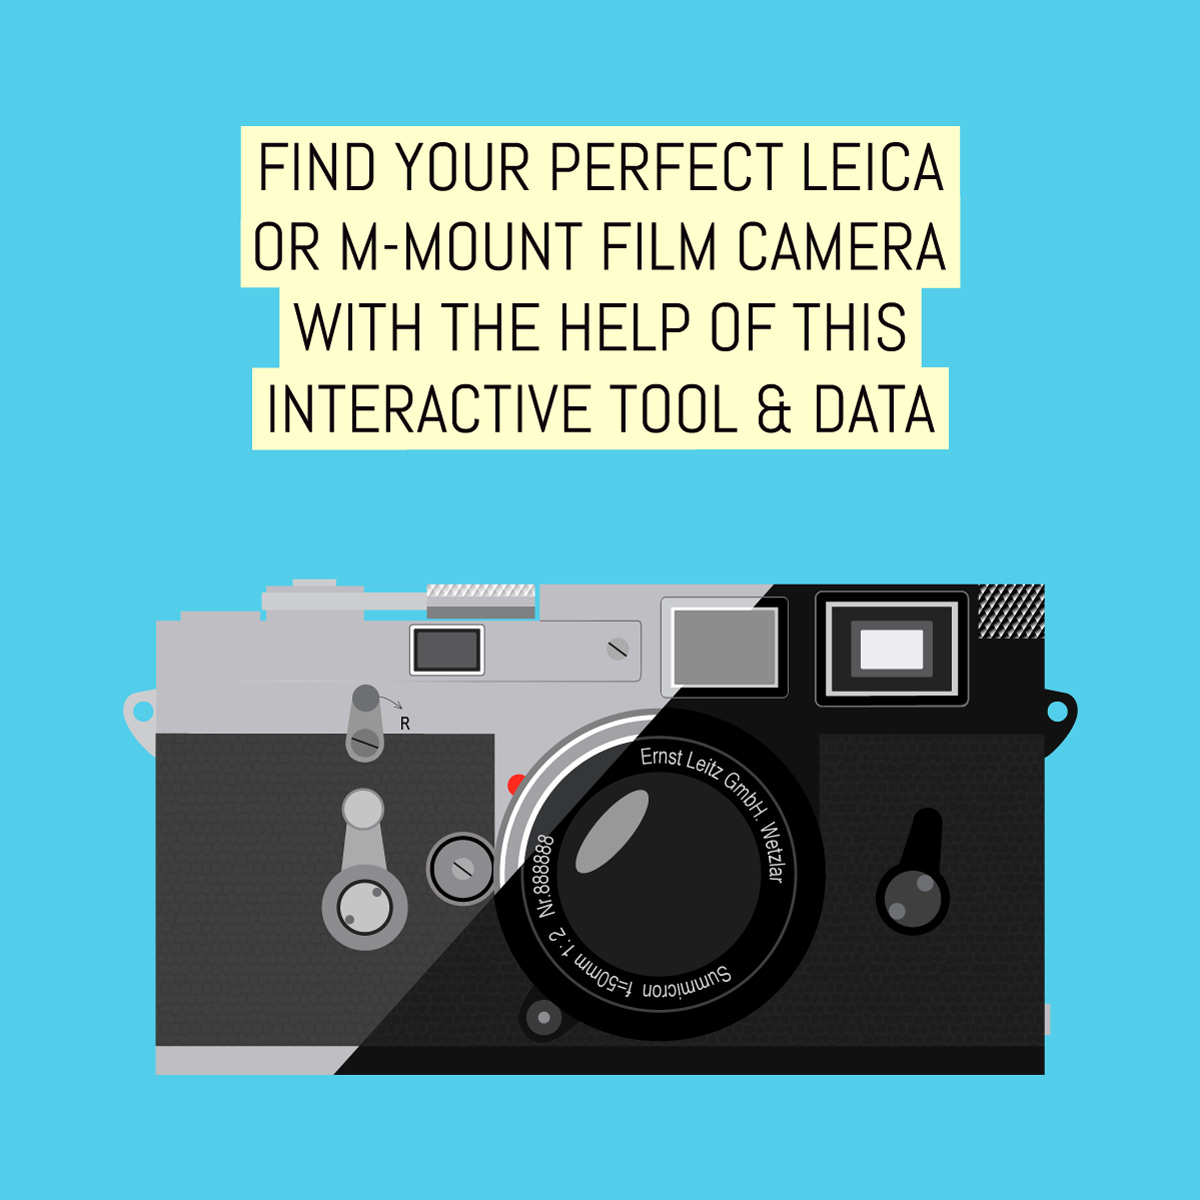 Find your perfect Leica or M-mount film camera with the help of this interactive tool and reference data image